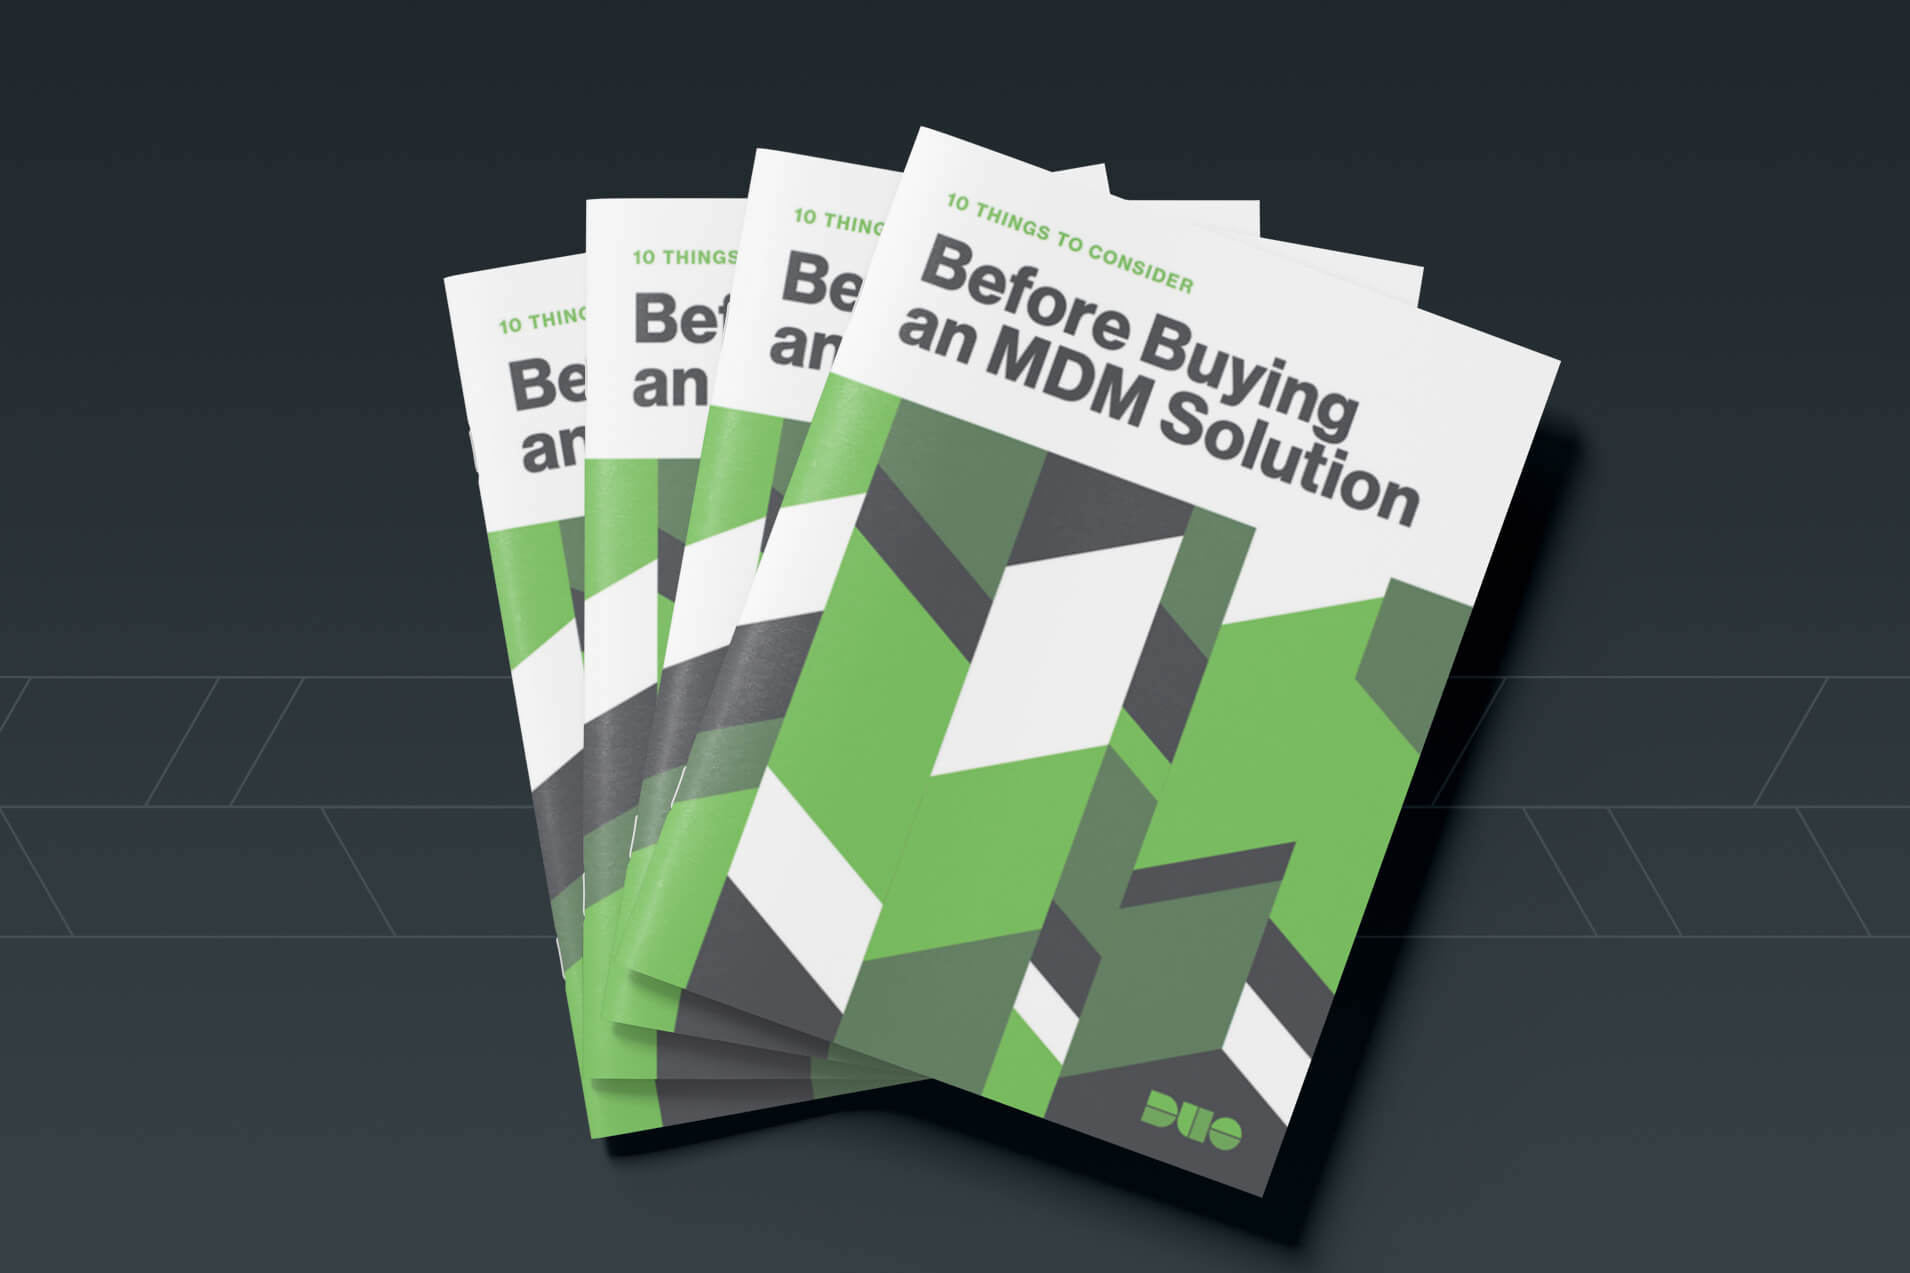 10 Things to Consider Before Buying an MDM Solution